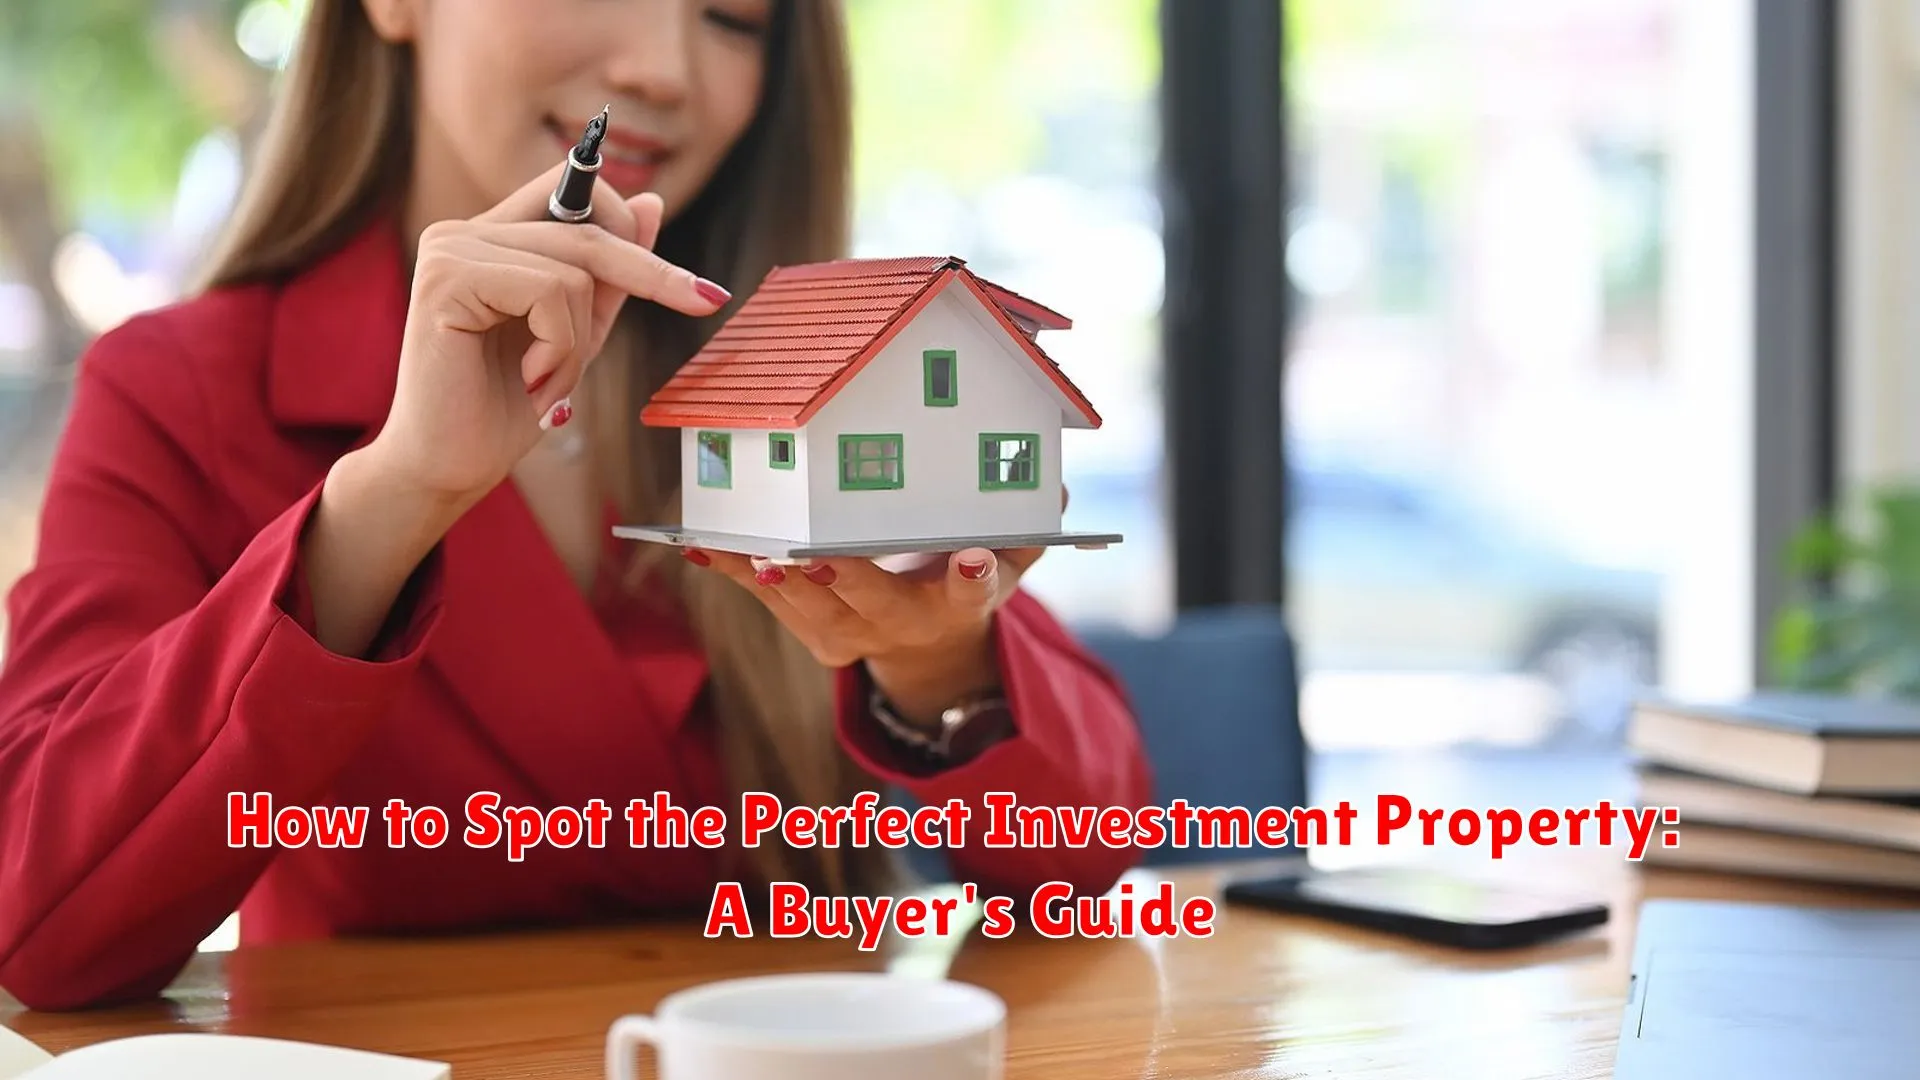 How to Spot the Perfect Investment Property: A Buyer's Guide